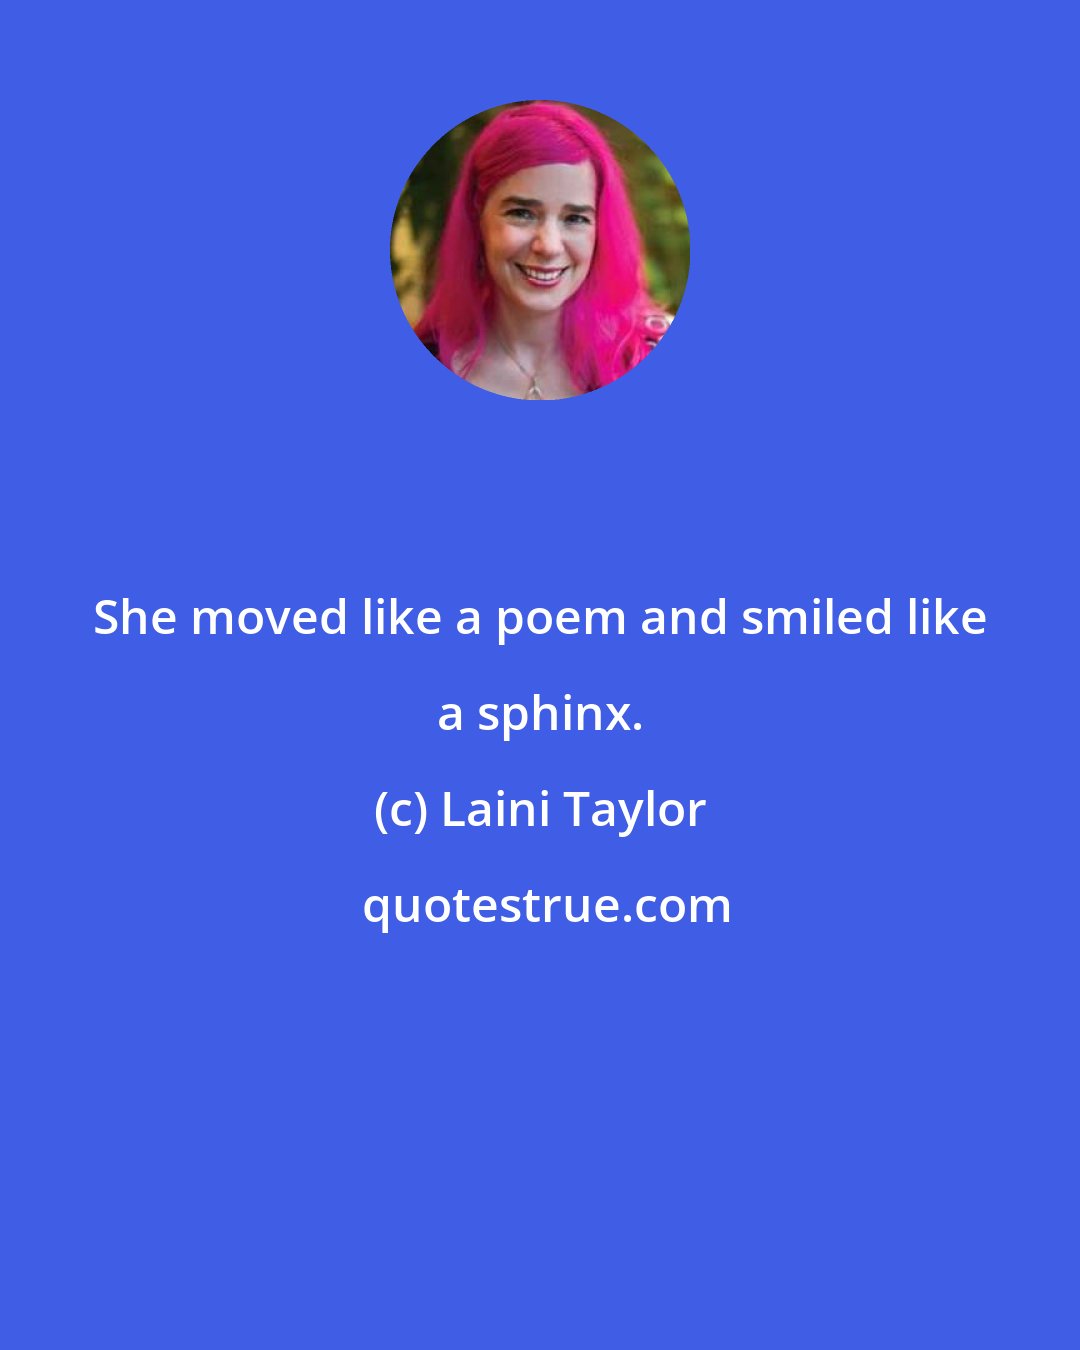 Laini Taylor: She moved like a poem and smiled like a sphinx.